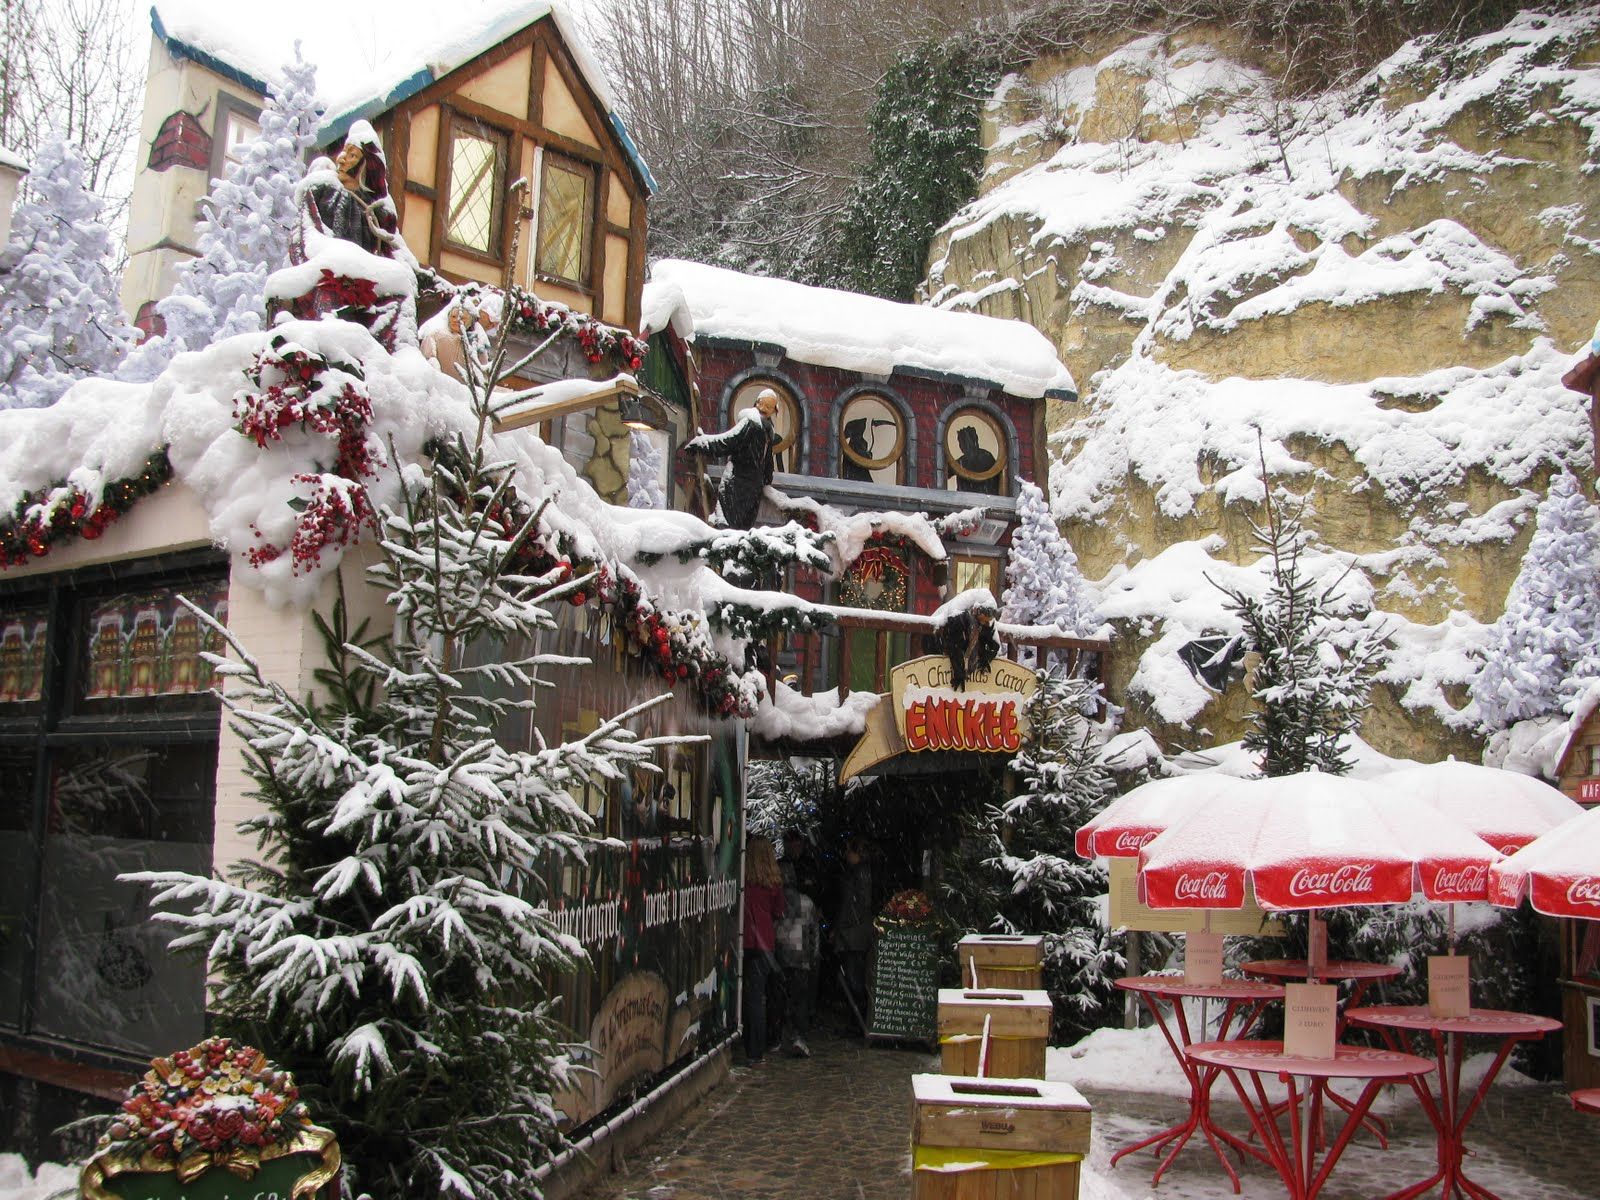 A Photo of the snow-covered entrance to the Valkenburg holiday market in The Netherlands.